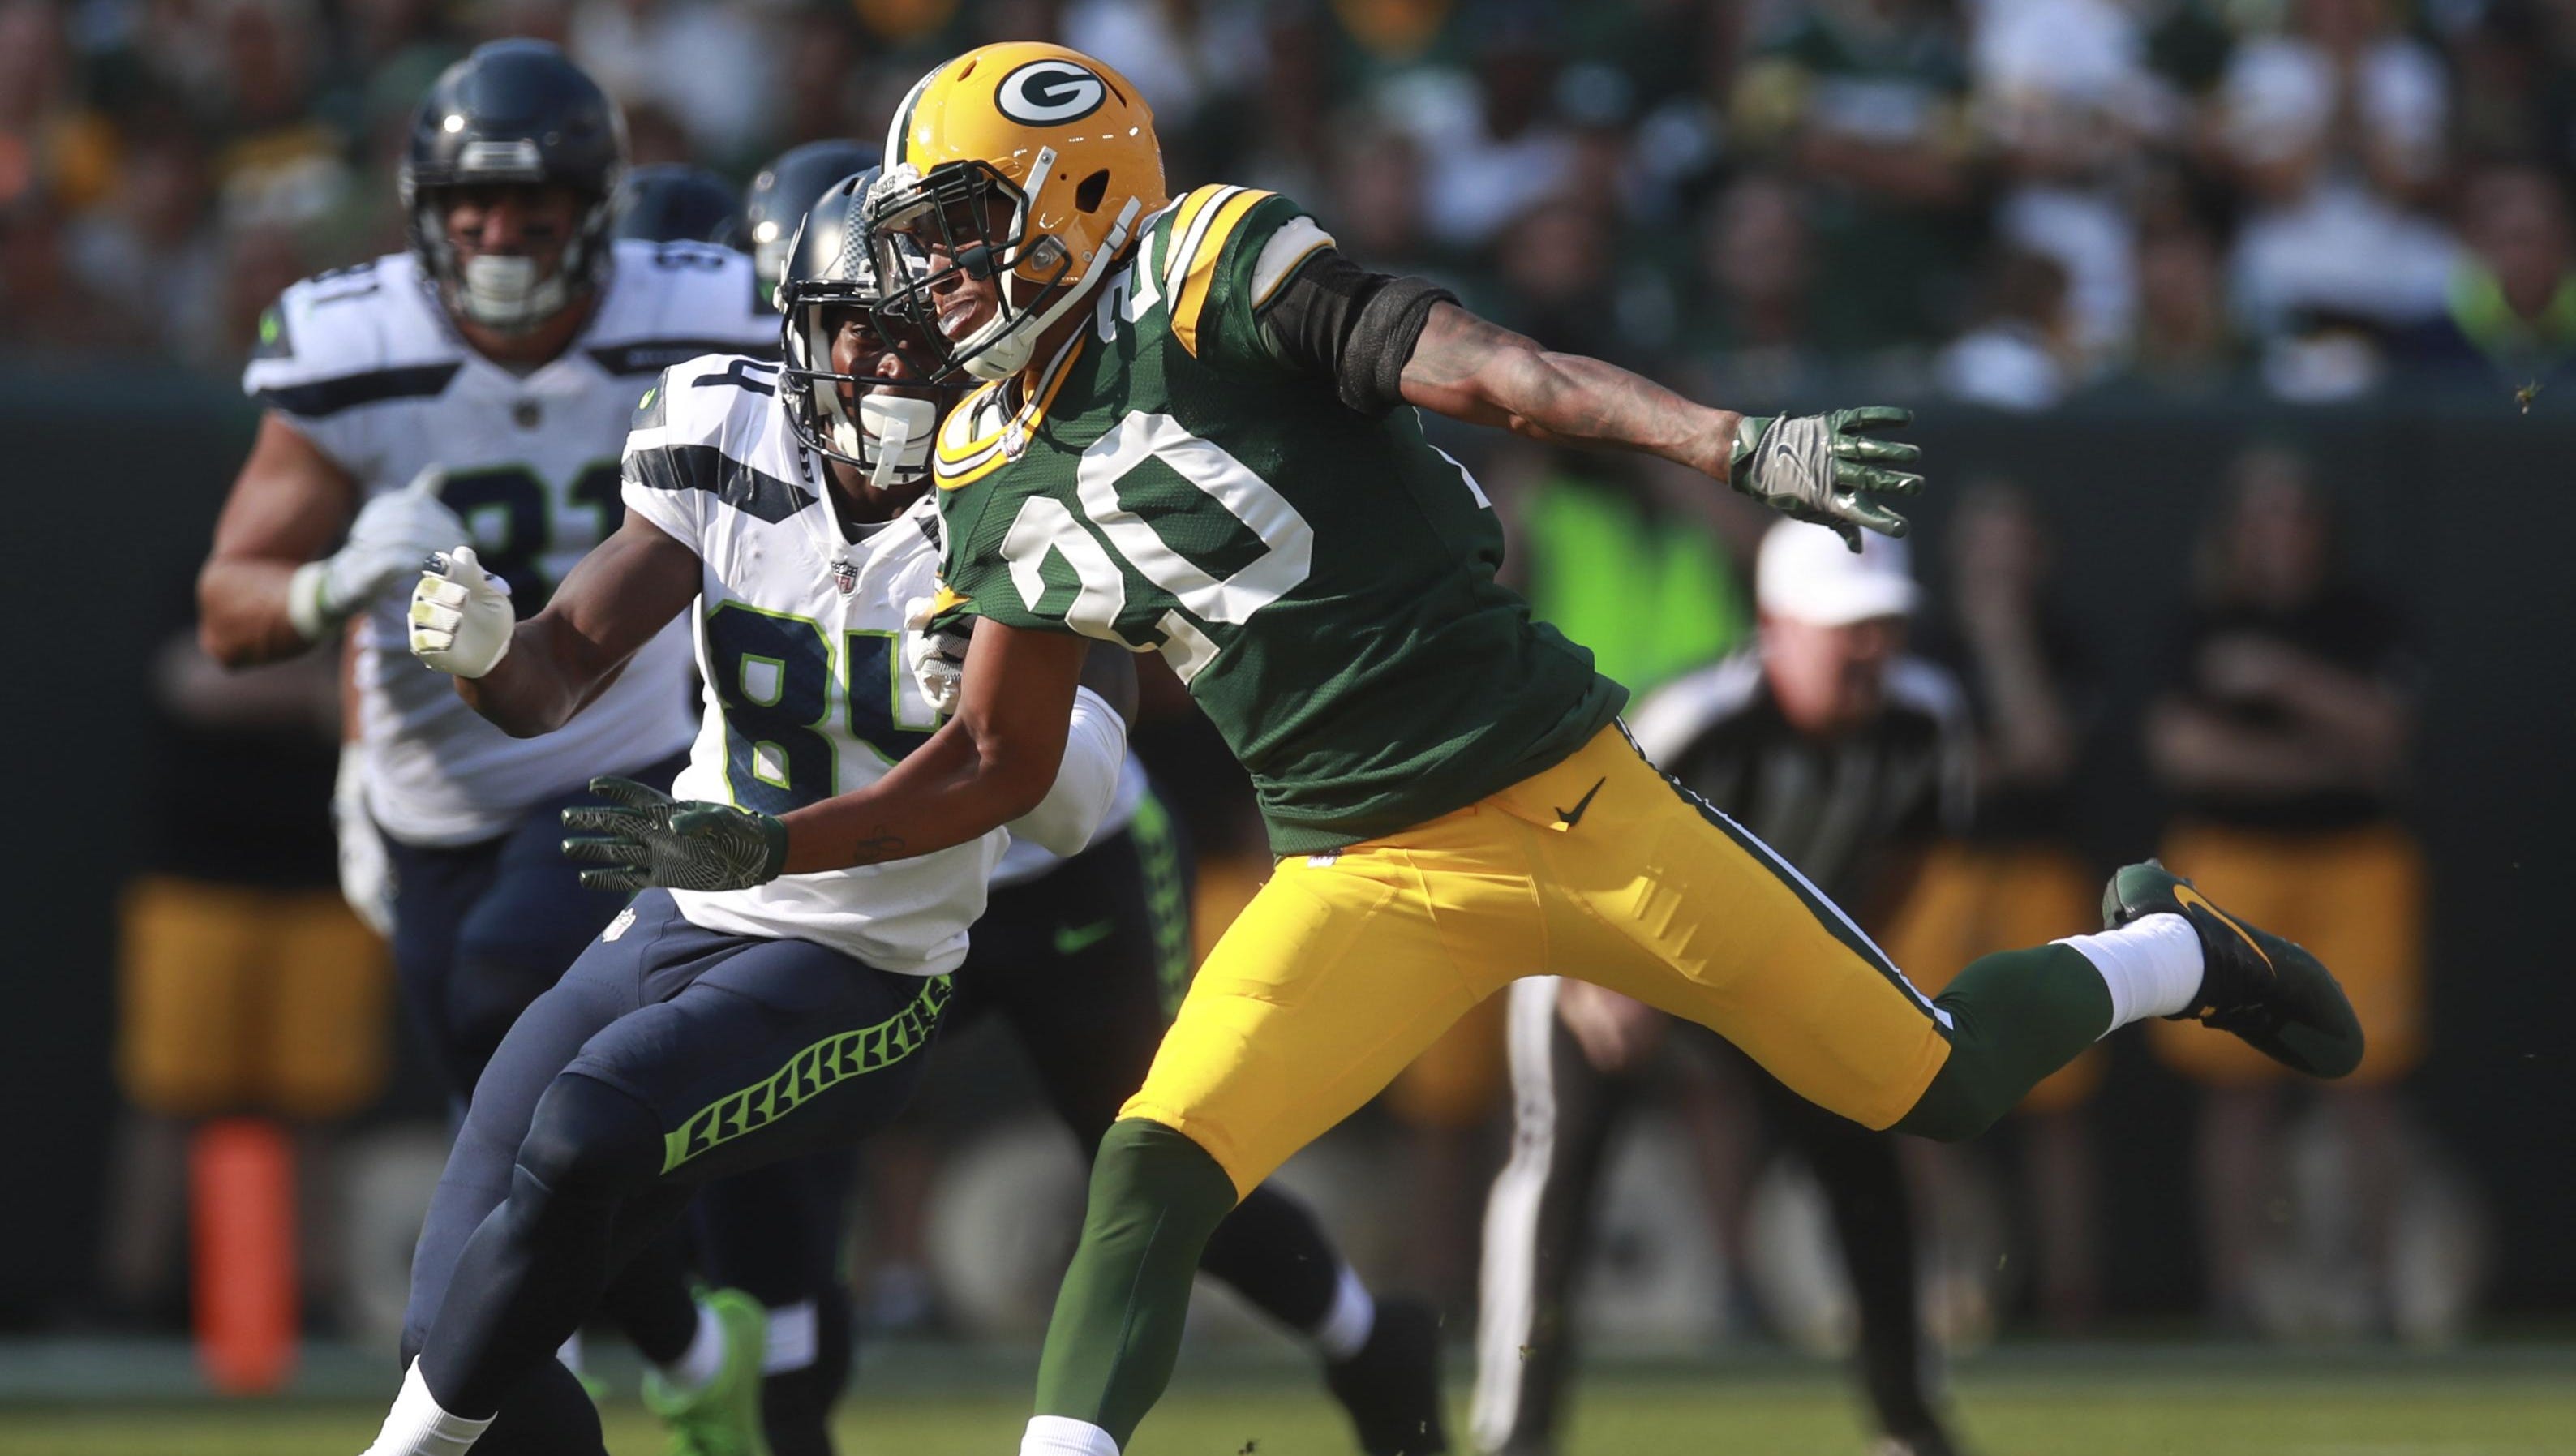 Second-round pick Kevin King has given the Green Bay secondary some athleticism that it was sorely lacking.